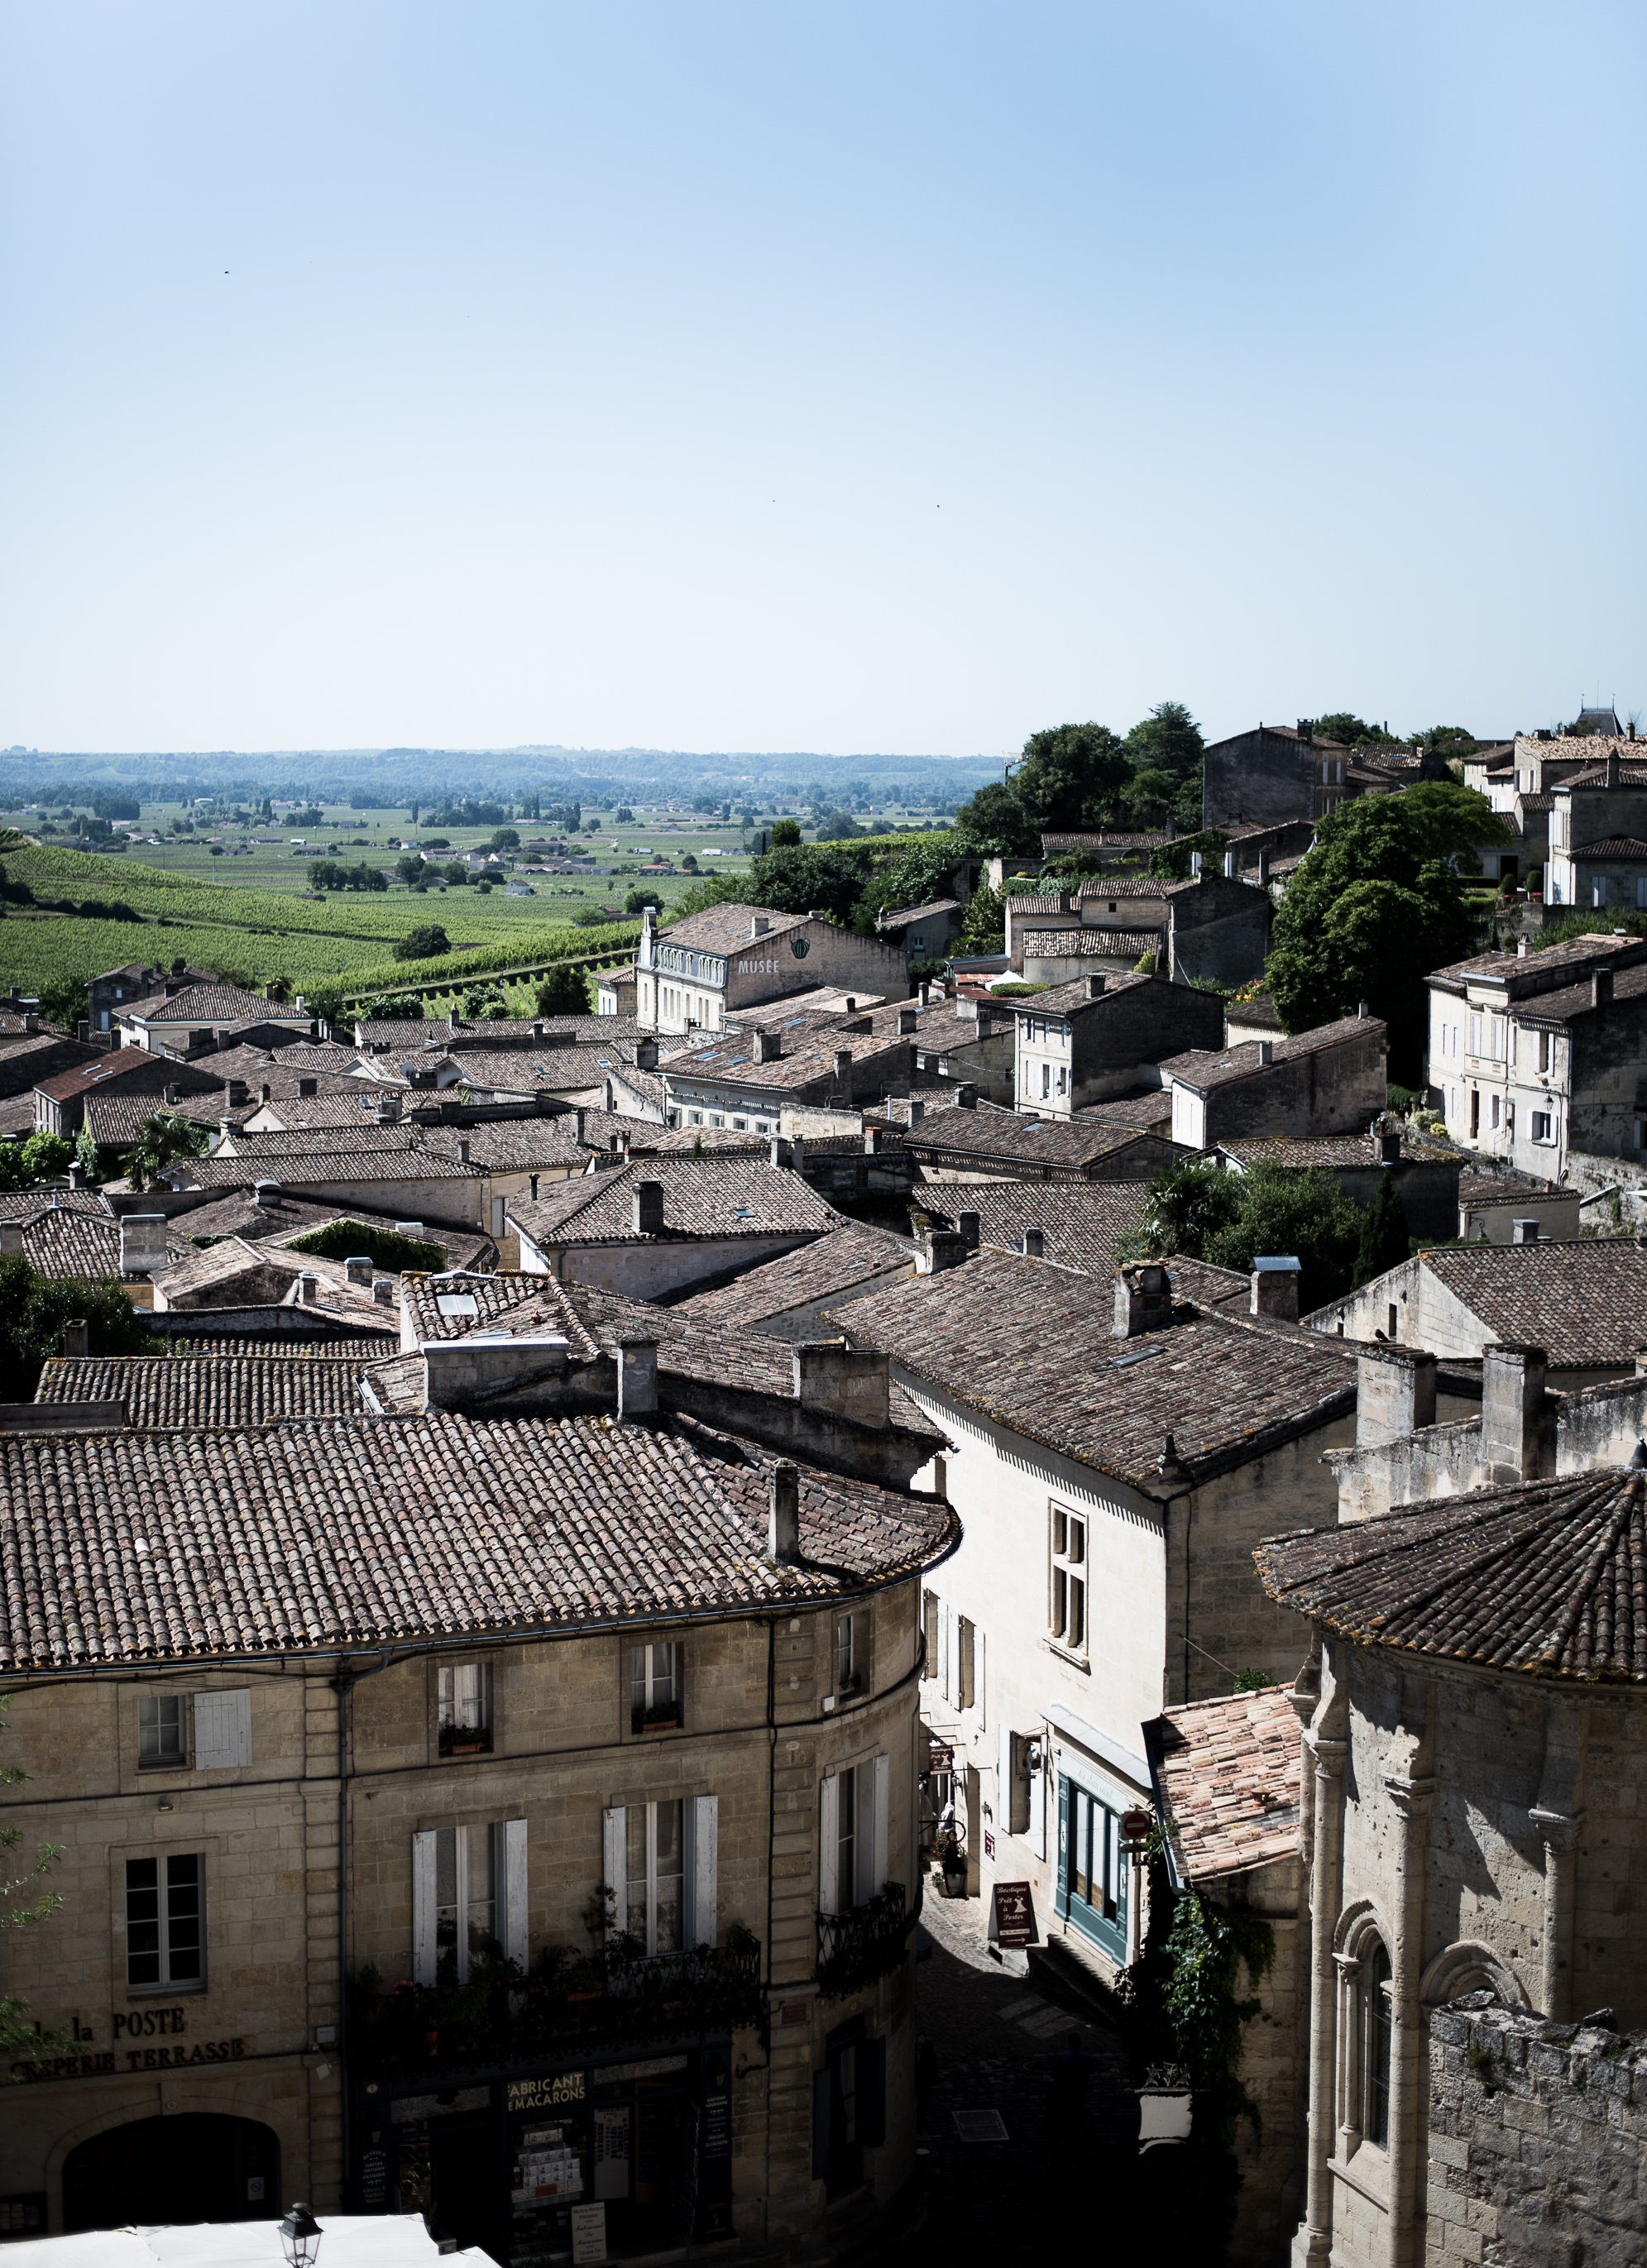 After the styling portion of our workshop we spent our final days visiting the surrounding towns of the Chateau. We shopped the open-air market in Perigeux and walked the hills of Saint-Émilion - both of which are UNESCO world heritage sites. 